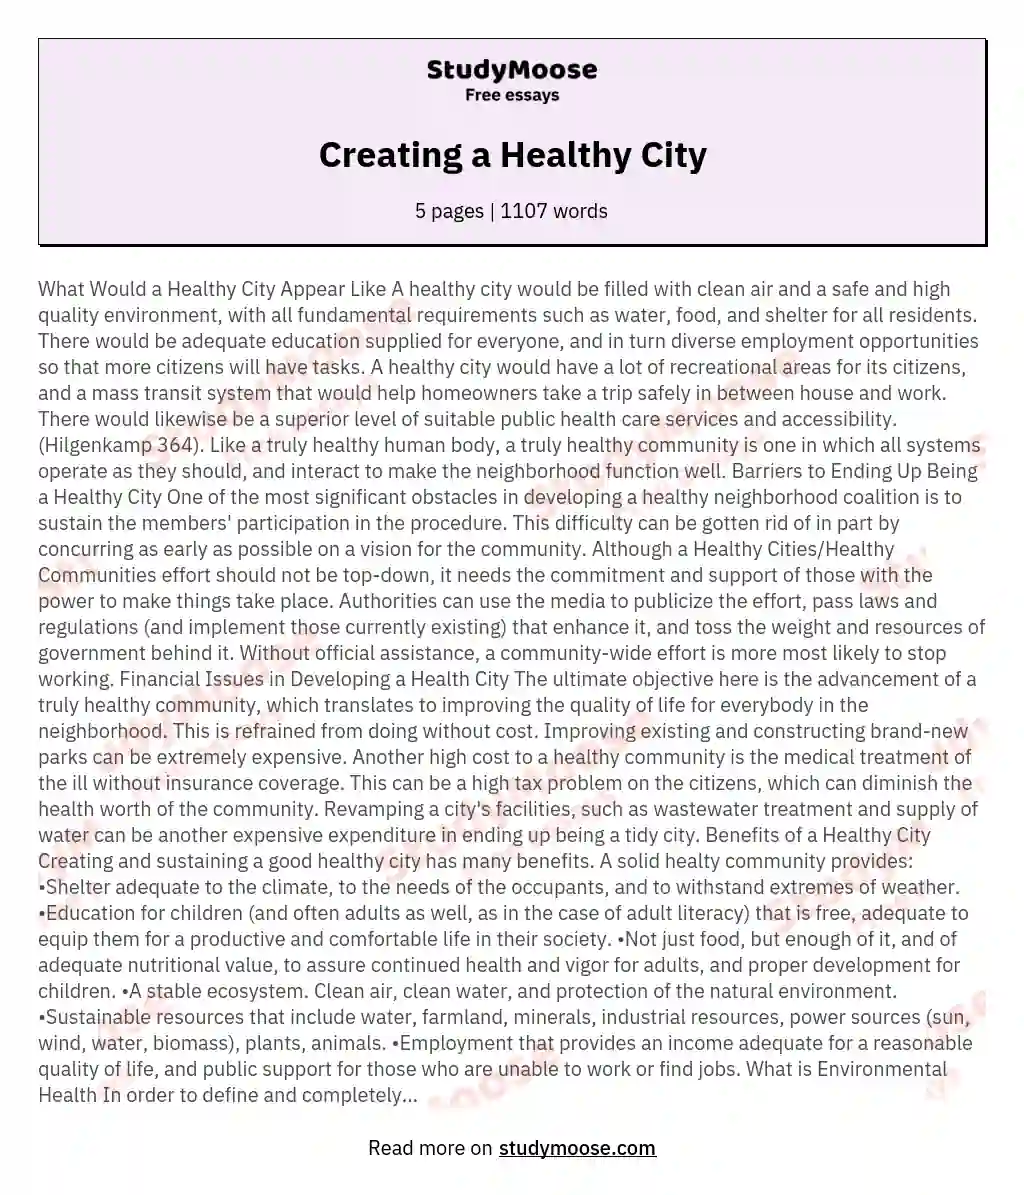 Creating a Healthy City